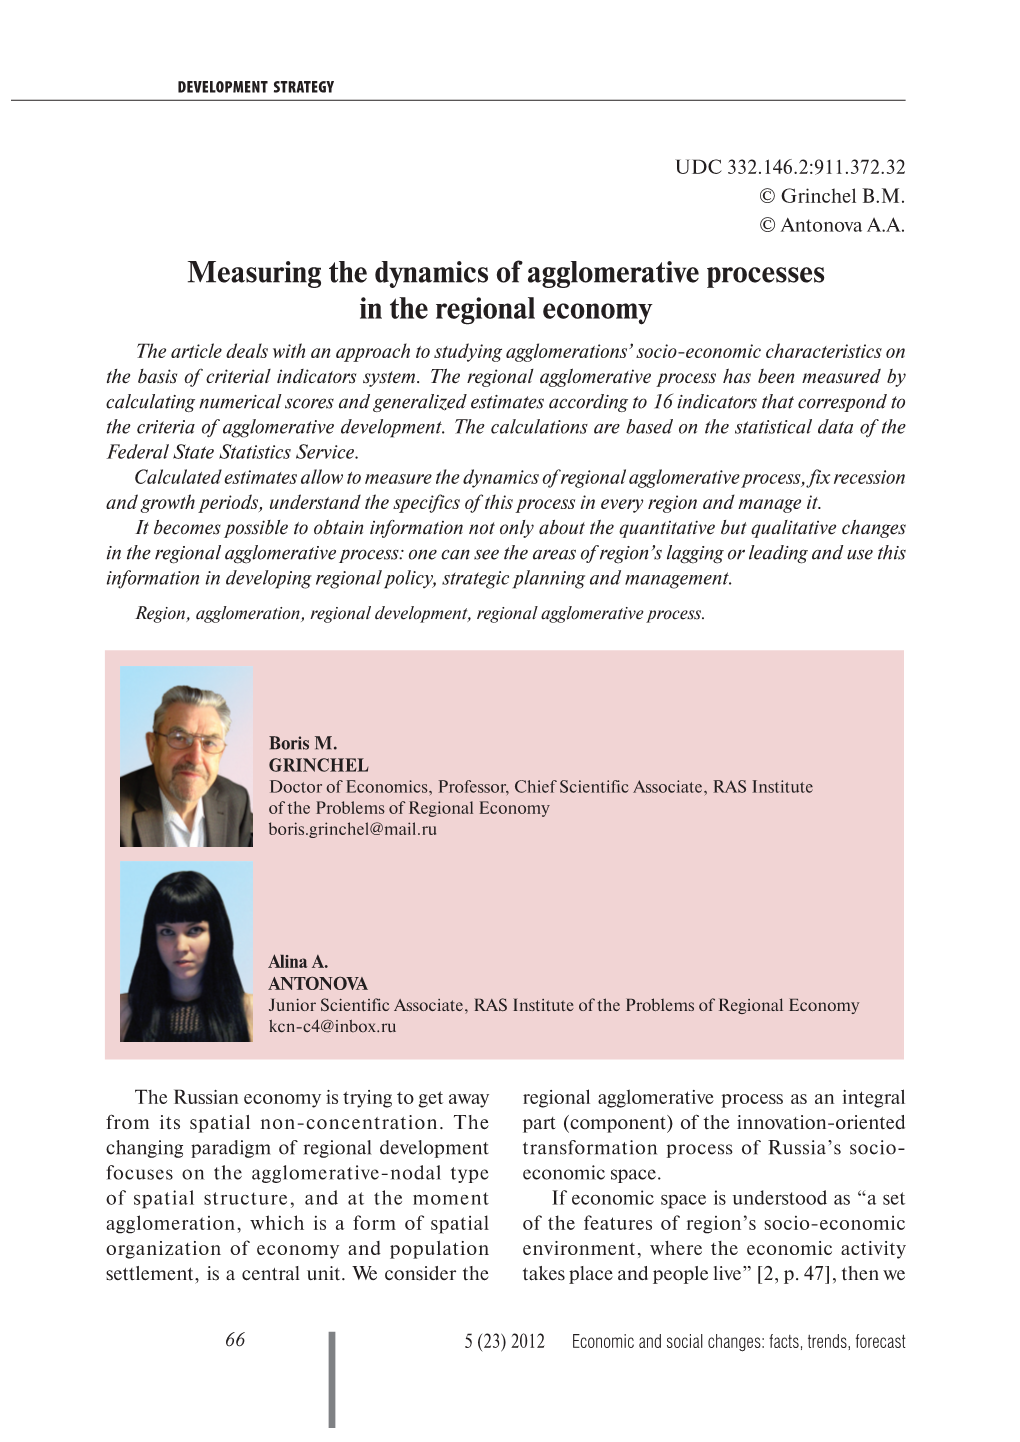 Measuring the Dynamics of Agglomerative Processes in the Regional